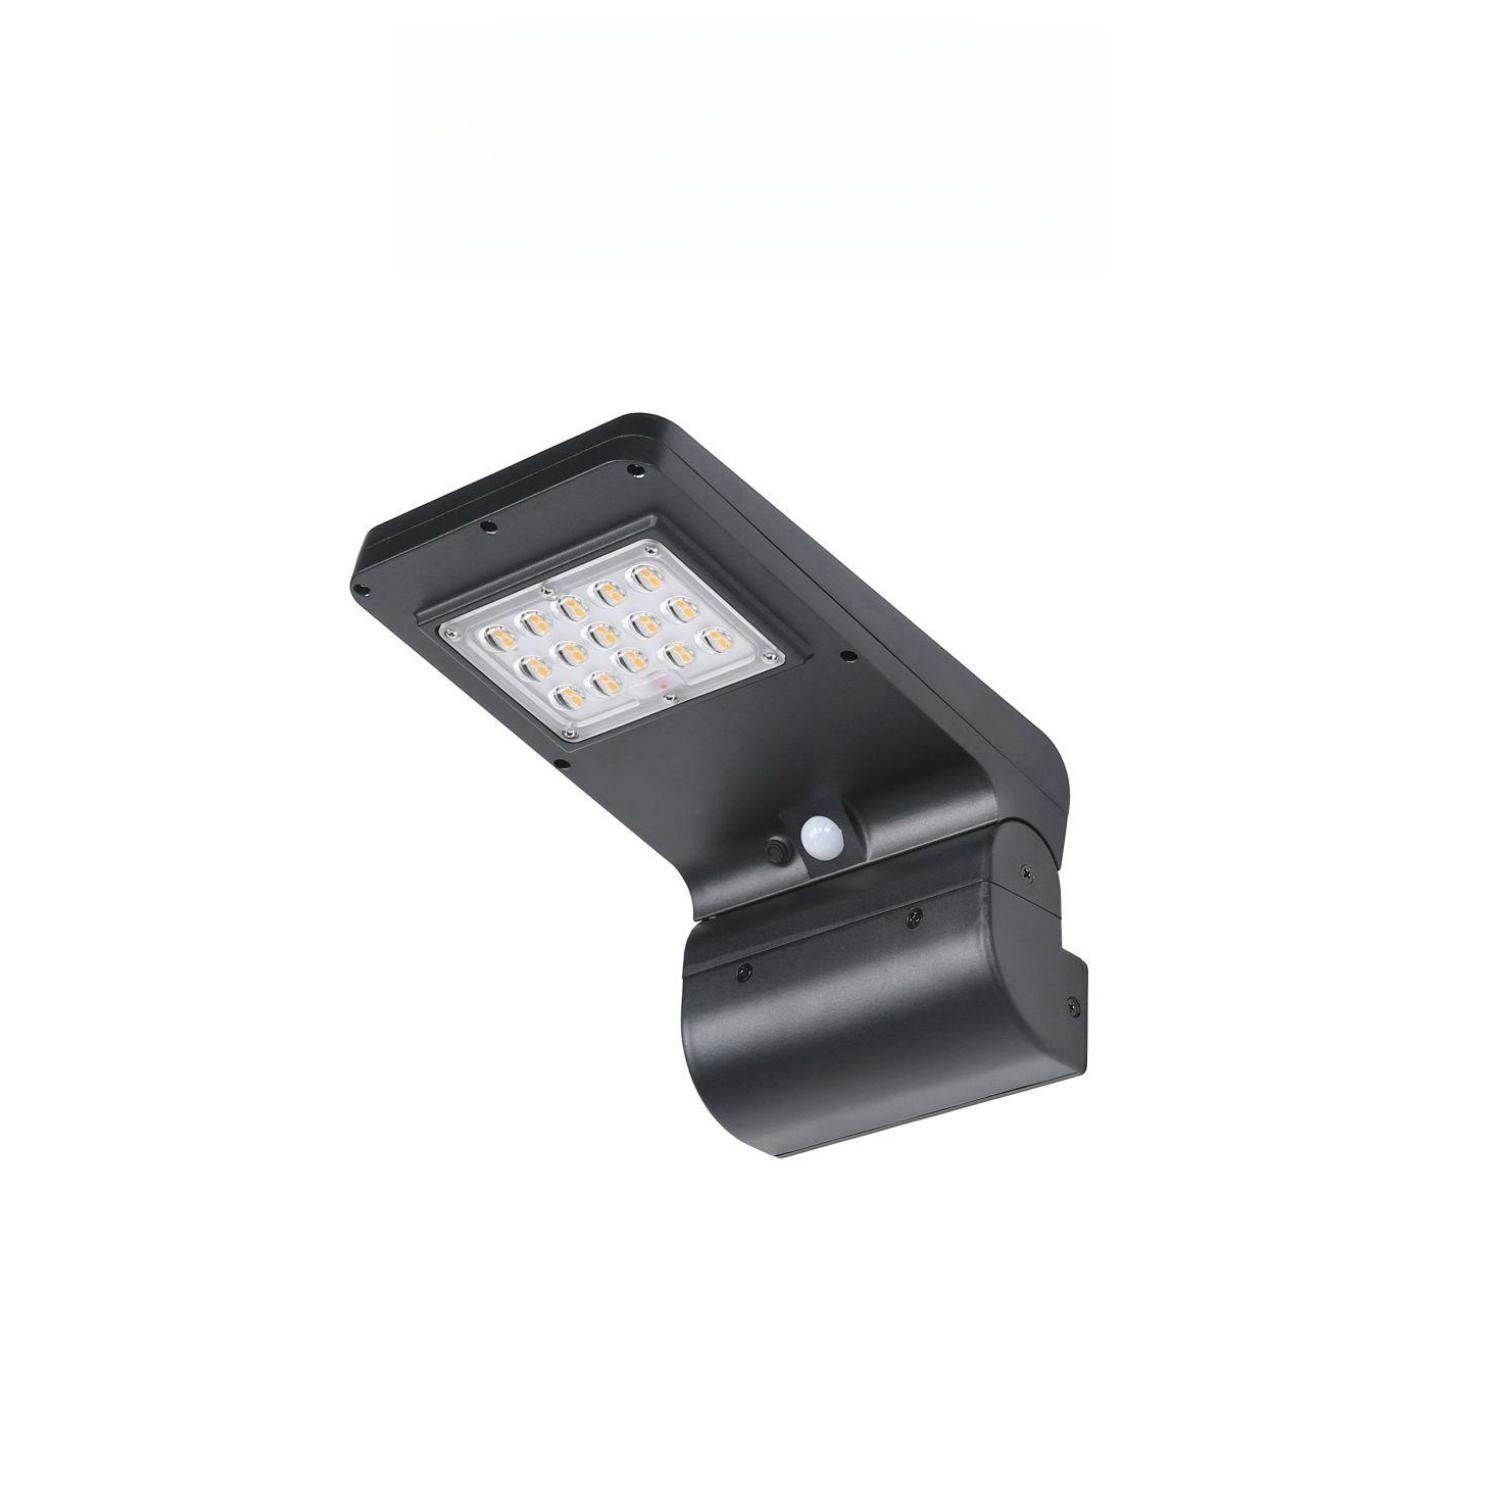 Outlux Solar Wall Lights- T036